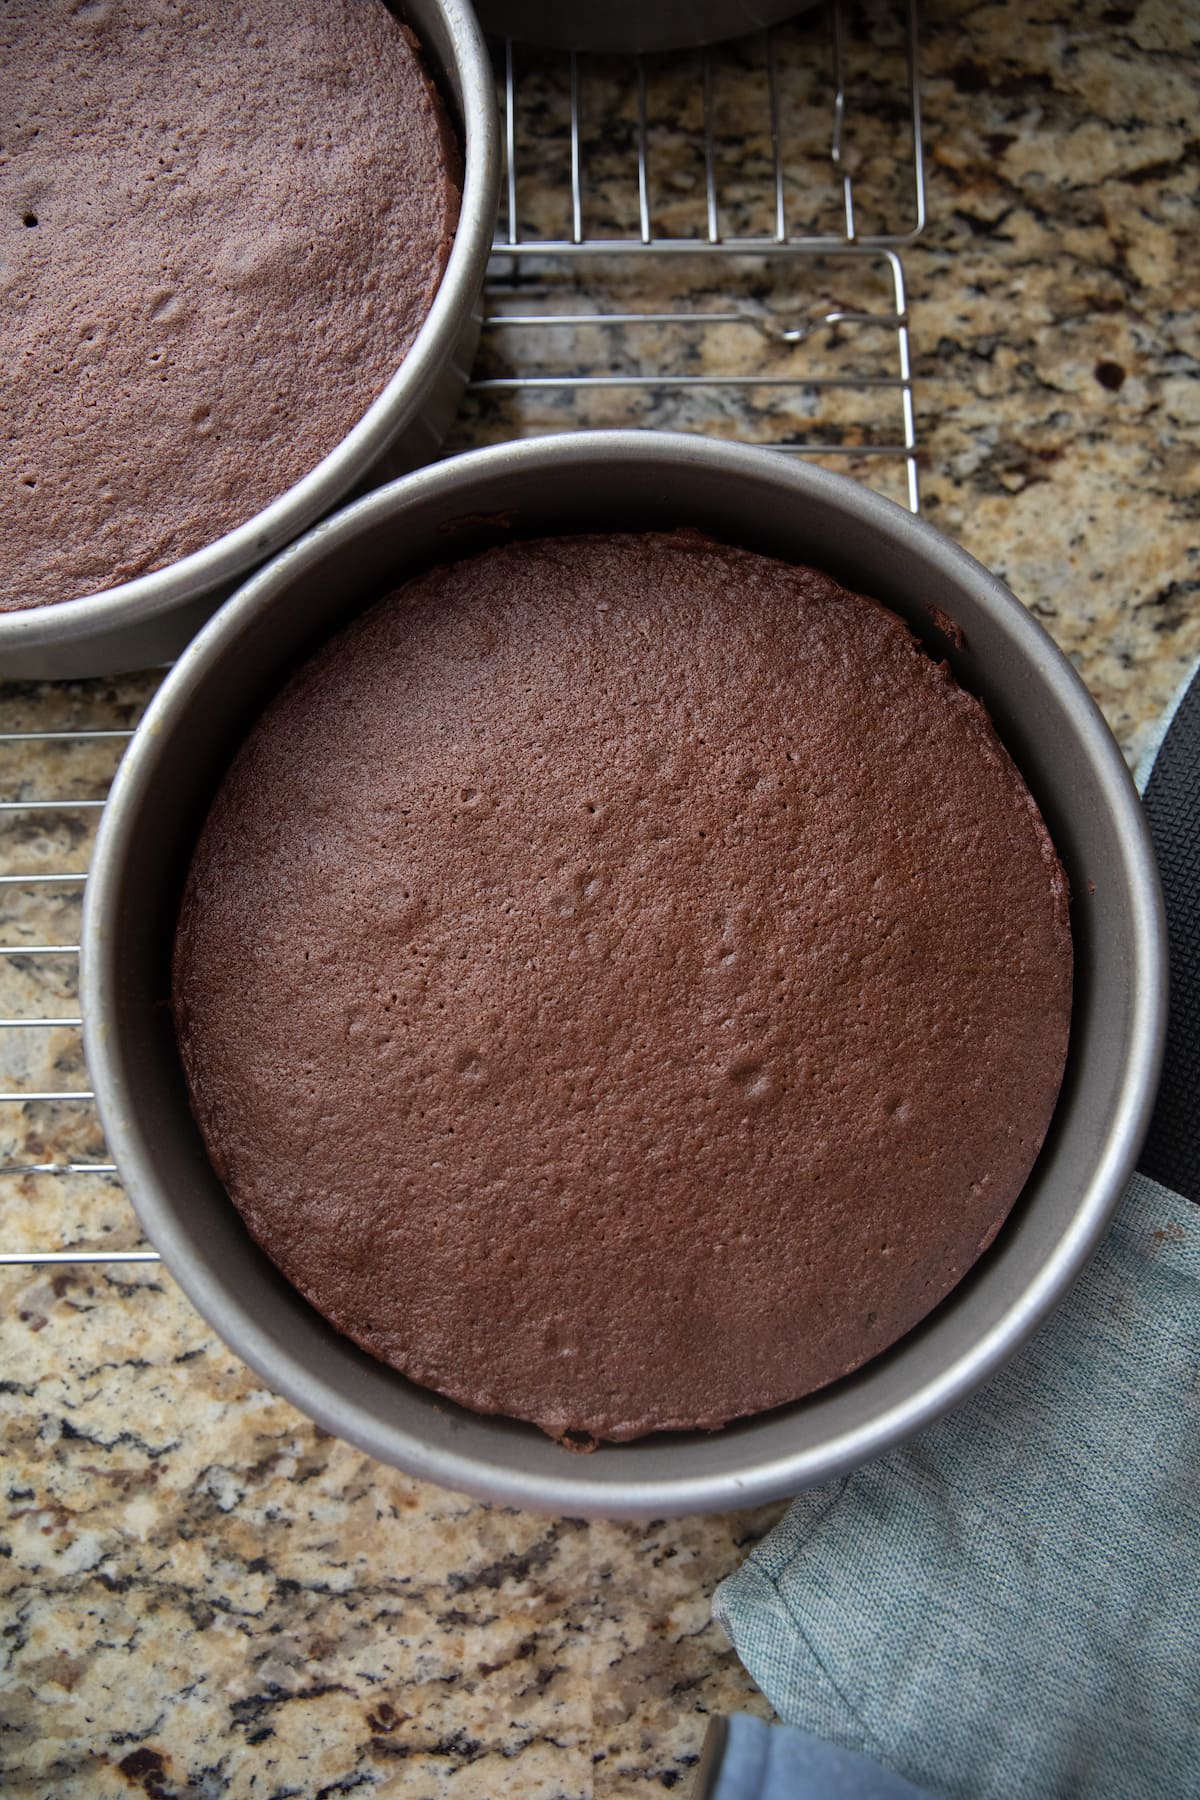 baked chocolate cake in pans